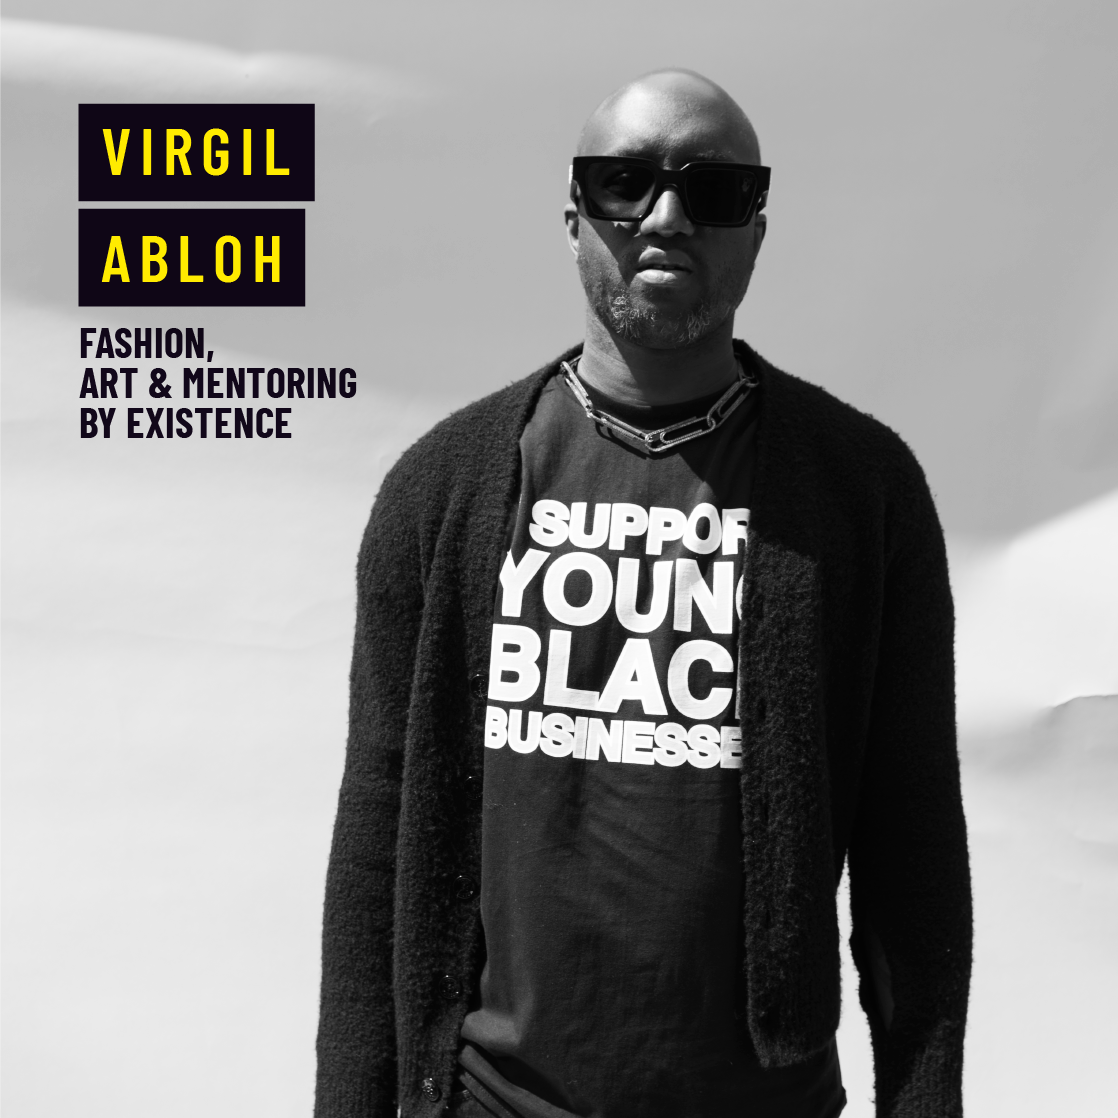 Everything you need to know about Virgil Abloh